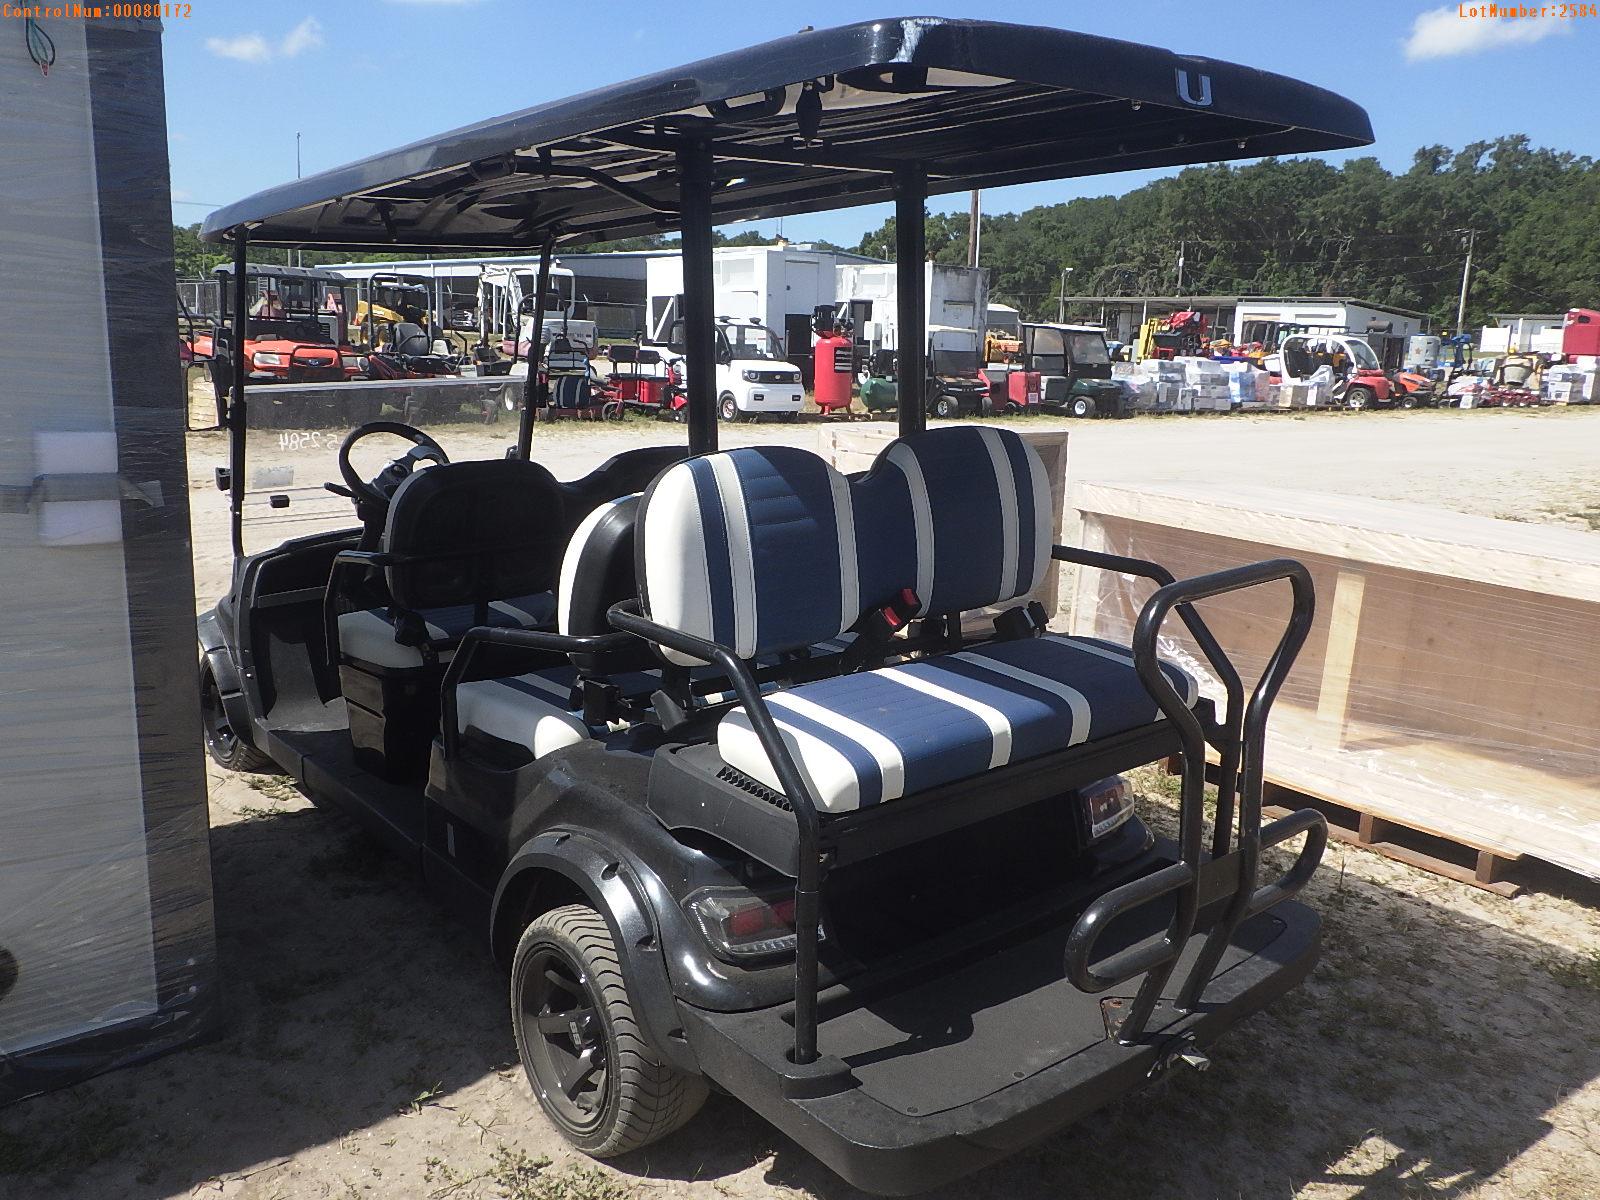 5-02584 (Equip.-Cart)  Seller:Private/Dealer ICON 160 SIDE BY SIDE SIX PASSENGER